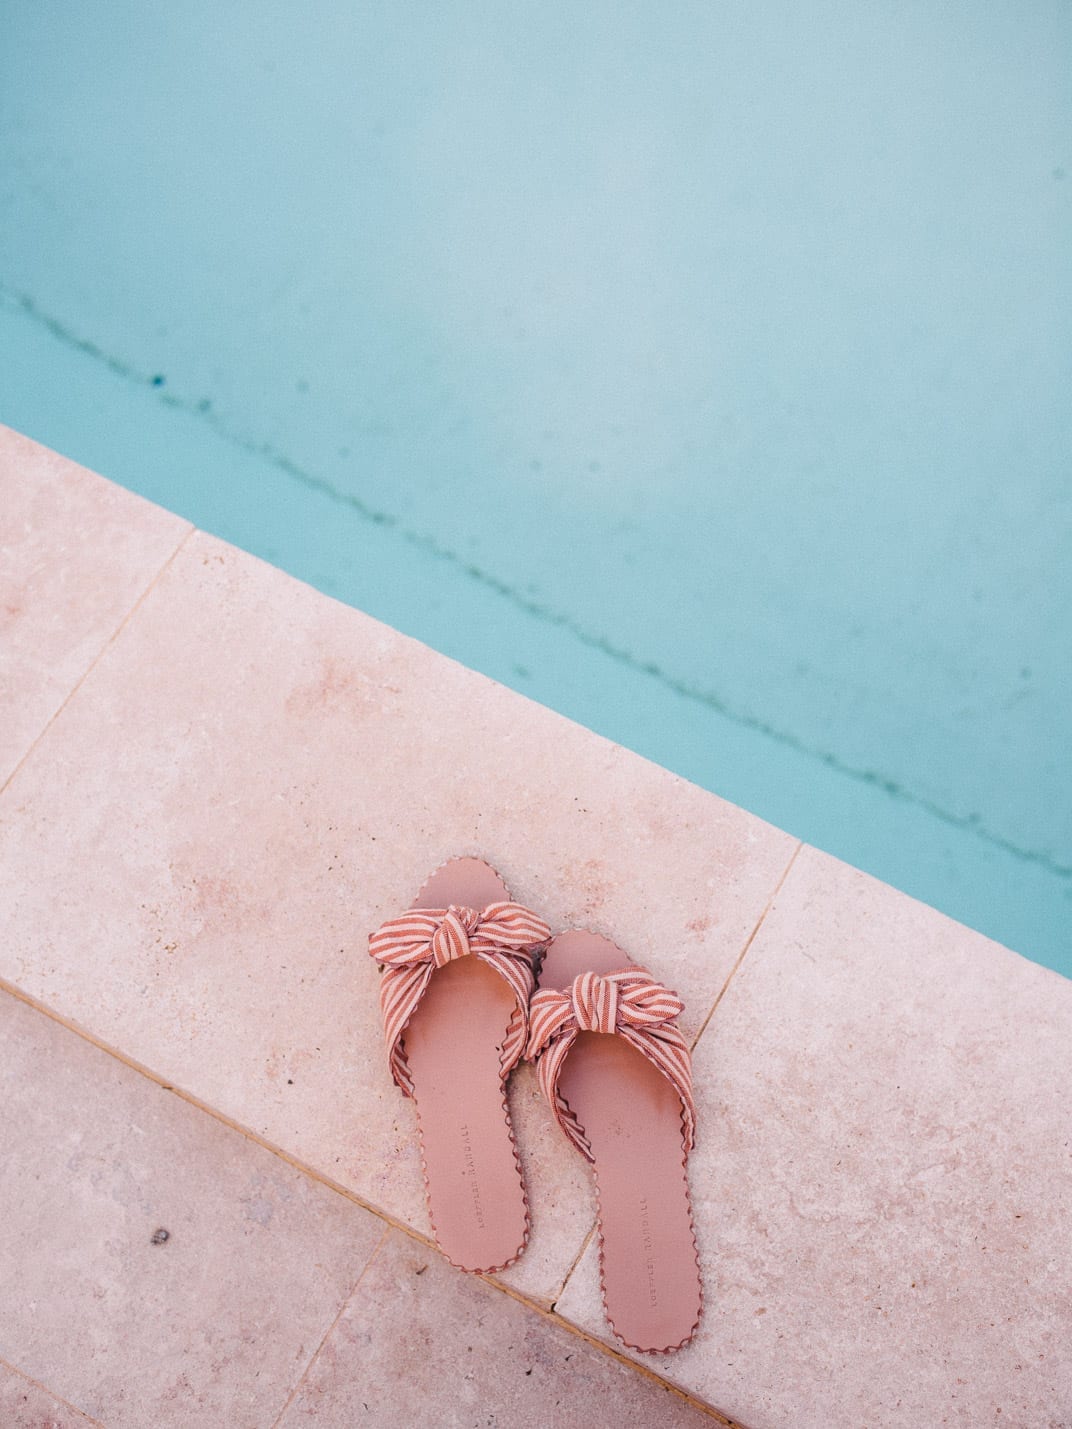 My top 5 Summer Staples - these sandals were amazing!